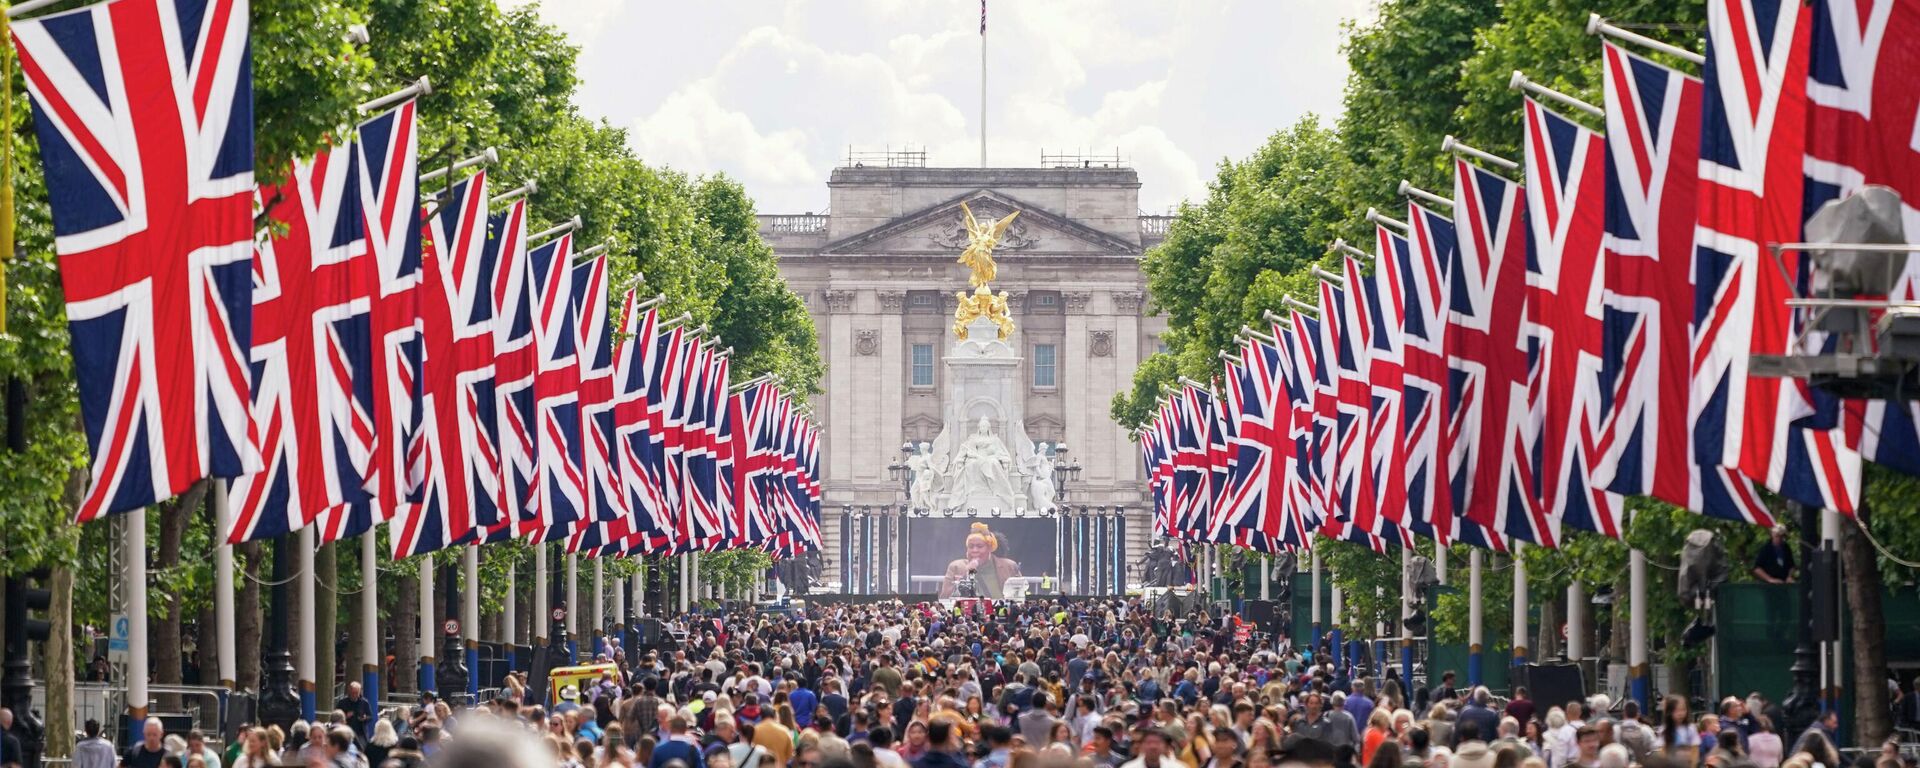 People walk along The Mall in London, Wednesday, June 1, 2022, ahead of the start of the Queen's Jubilee weekend. Britain will celebrate Queen Elizabeth II's 70 years on the throne with four days of festivities beginning with her ceremonial birthday parade on June 2, 2022 - Sputnik International, 1920, 05.06.2022